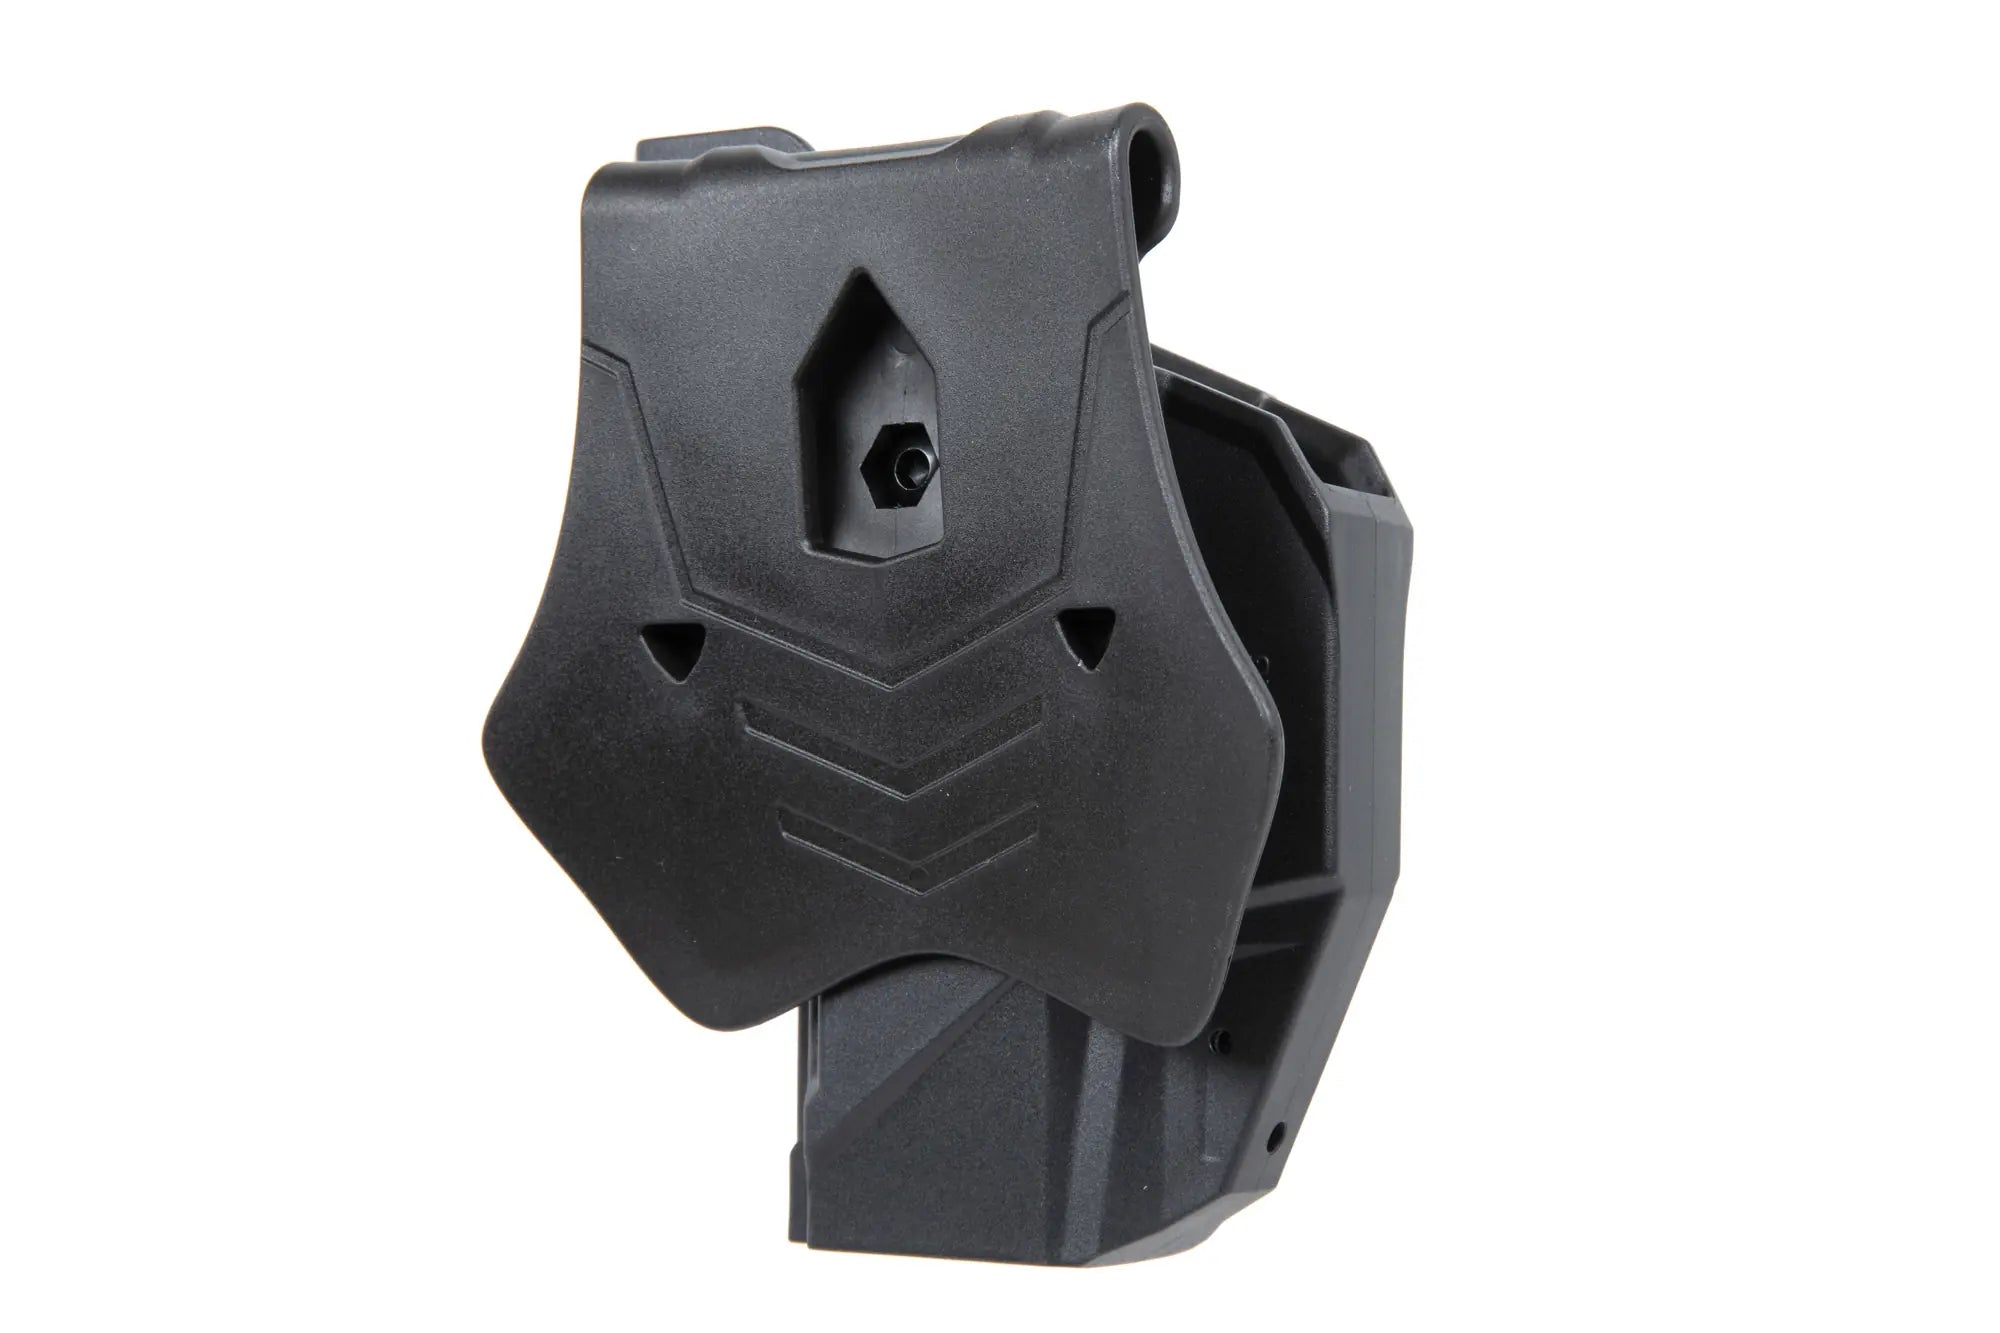 Amomax holster for Glock 19/23/32 type replicas with optics (right-handed) Black-2